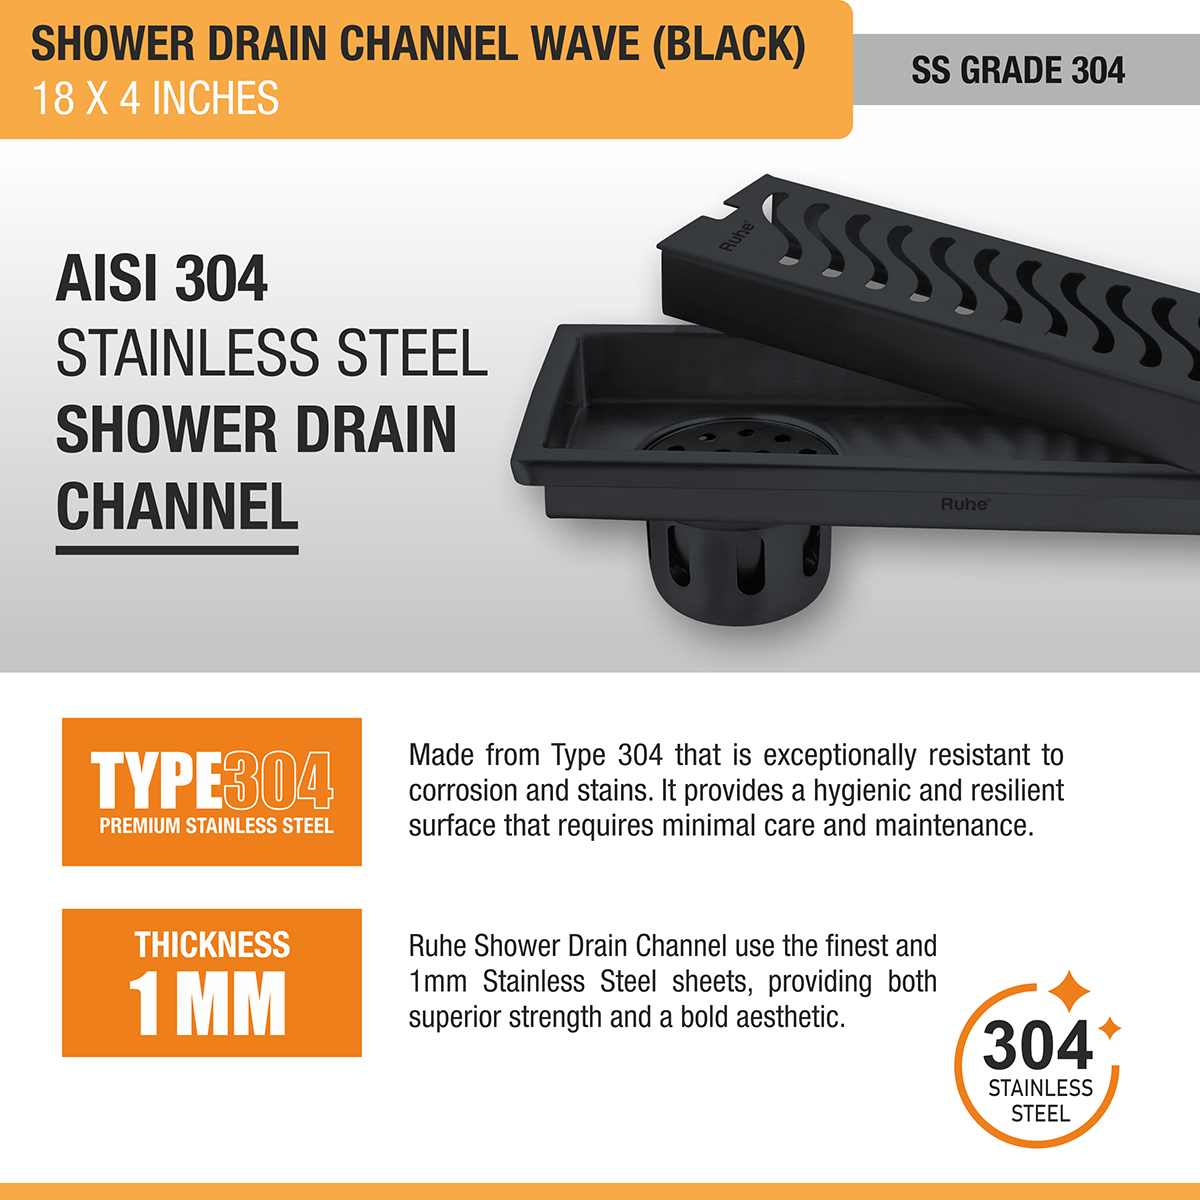 Wave Shower Drain Channel (18 x 4 Inches) Black PVD Coated stainless steel